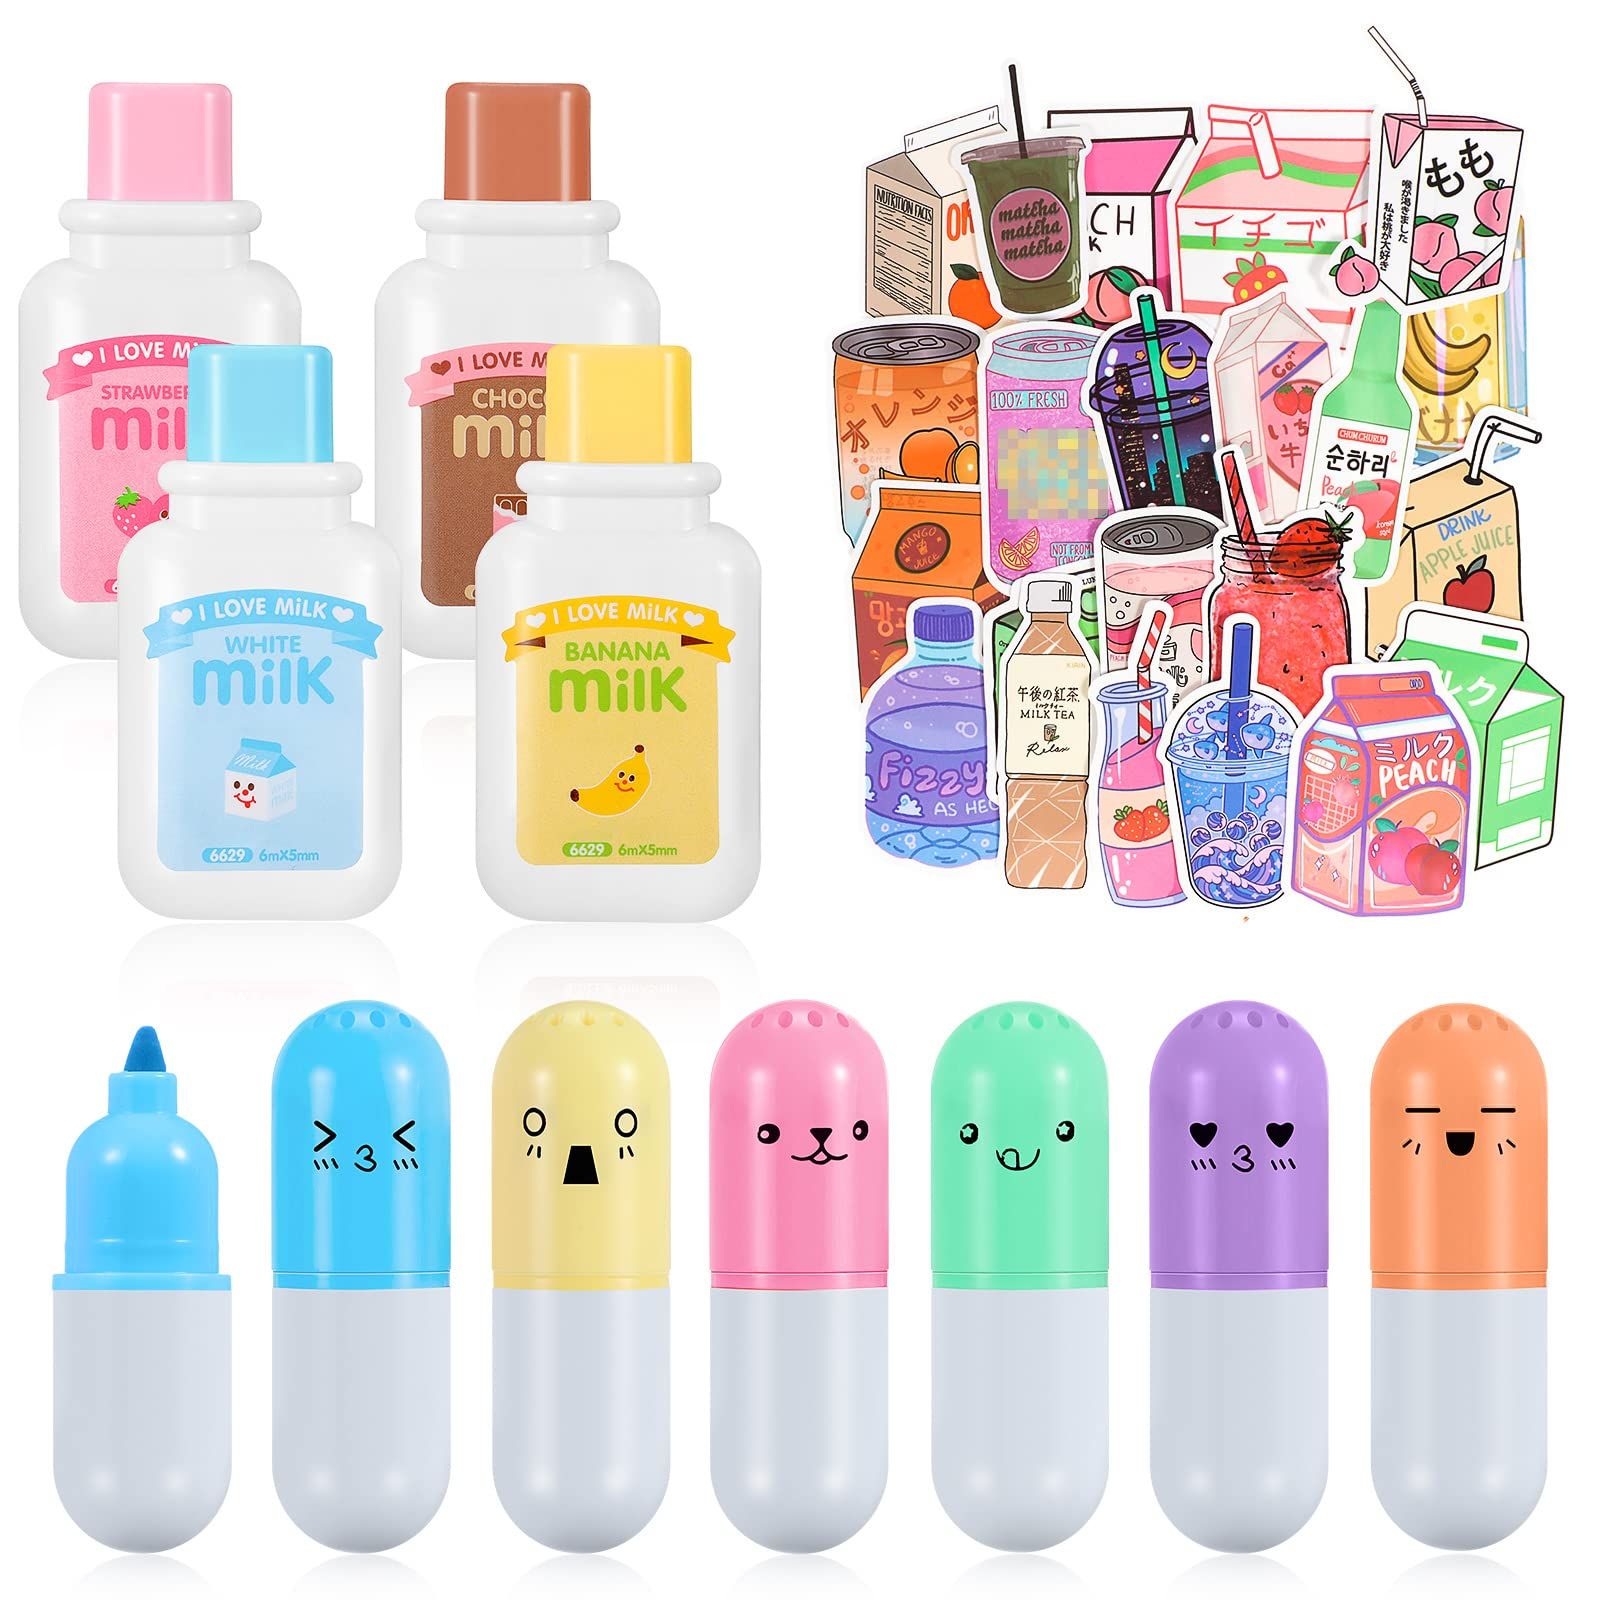 60 Pieces Cute Stationary Set Milk Bottle Correction Tape Aesthetic Pill Shaped Highlighter Pens Kaw | Amazon (US)